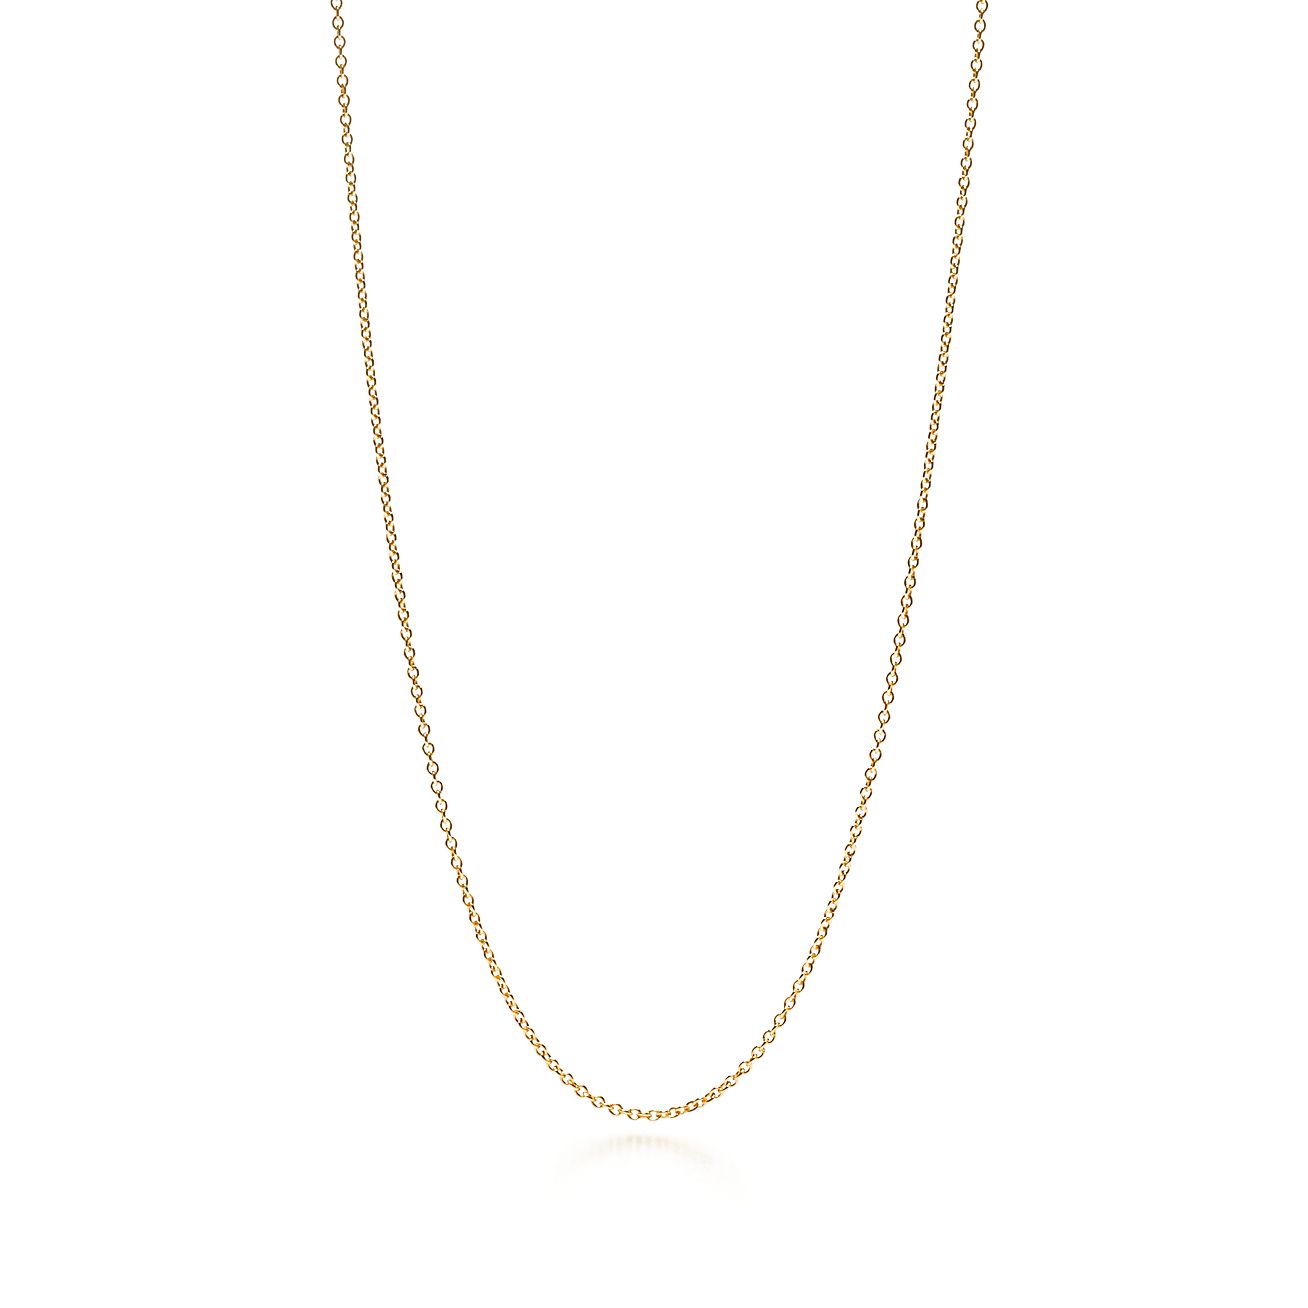 Shop 18K Gold Chain Necklace in 30 